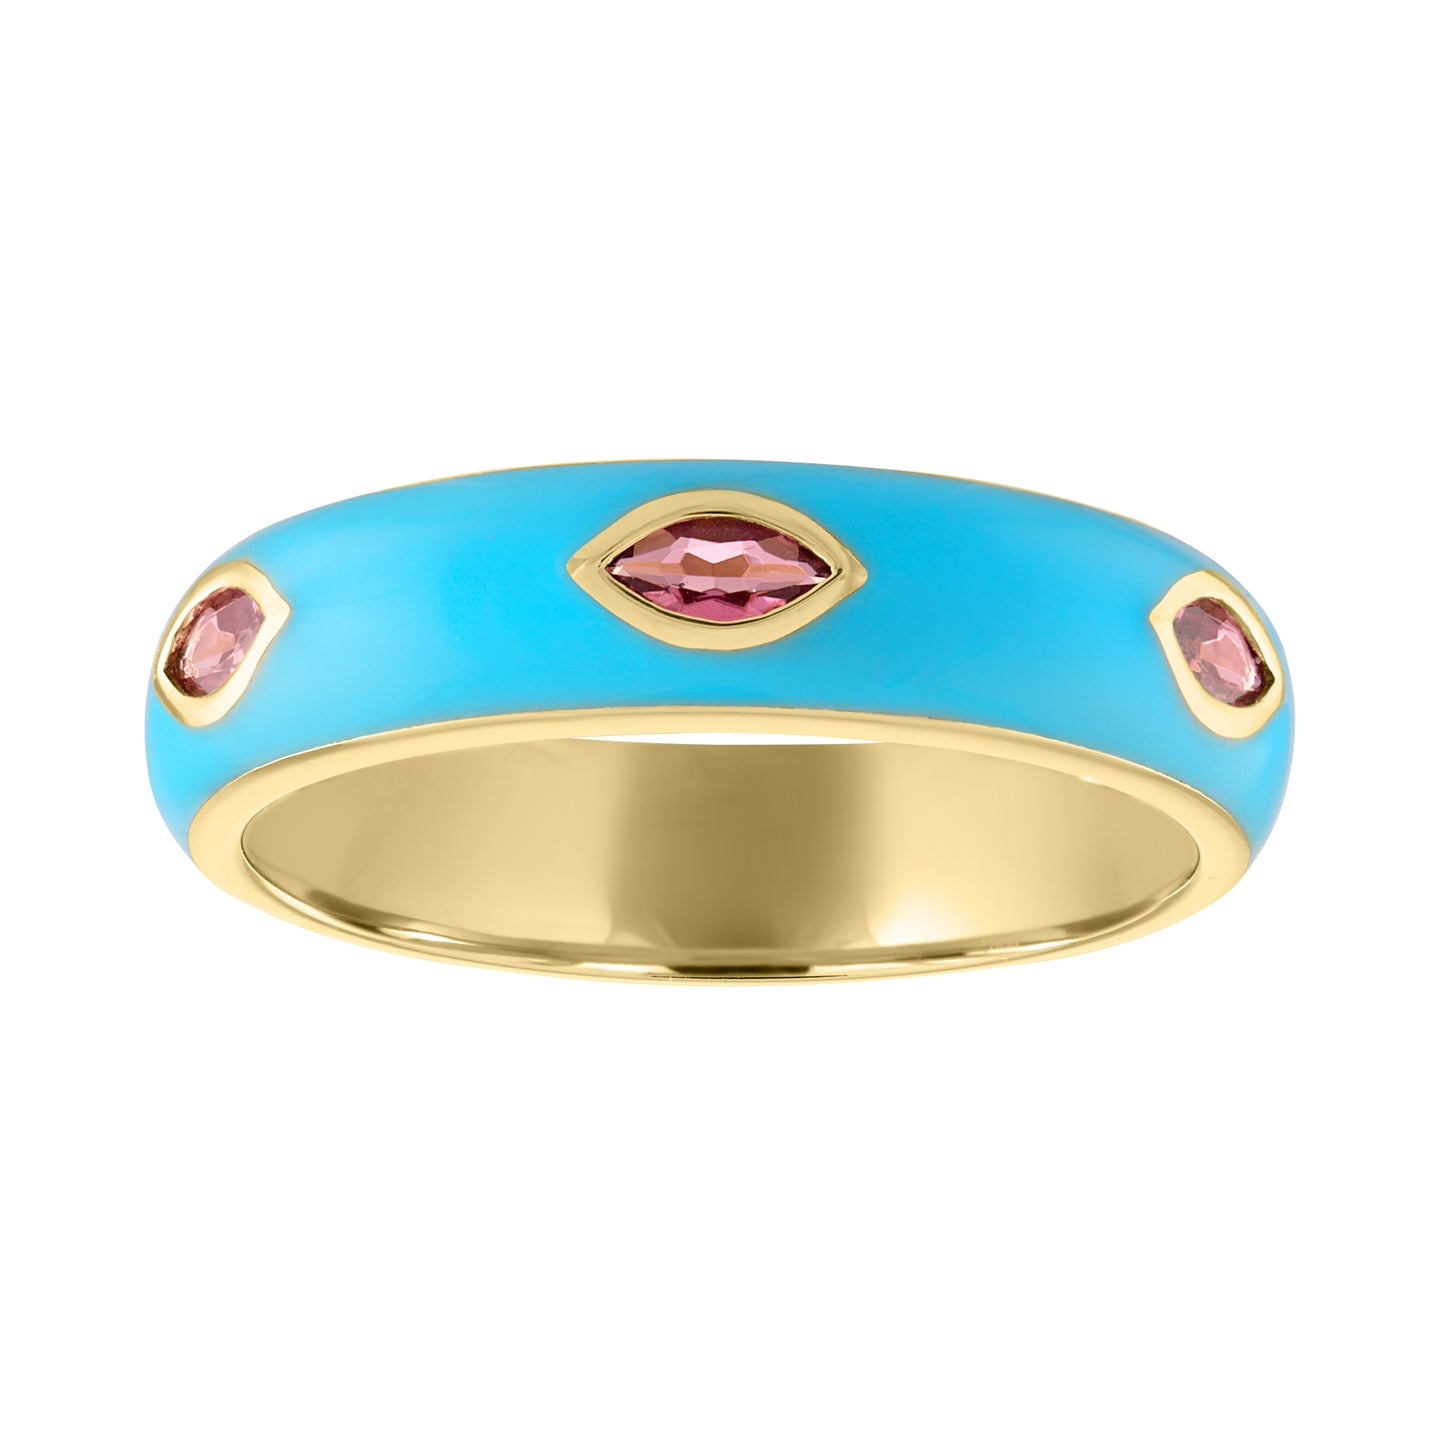 Yellow gold wide gypsy ring with blue enamel and bezeled marquise cut pink tourmalines. 